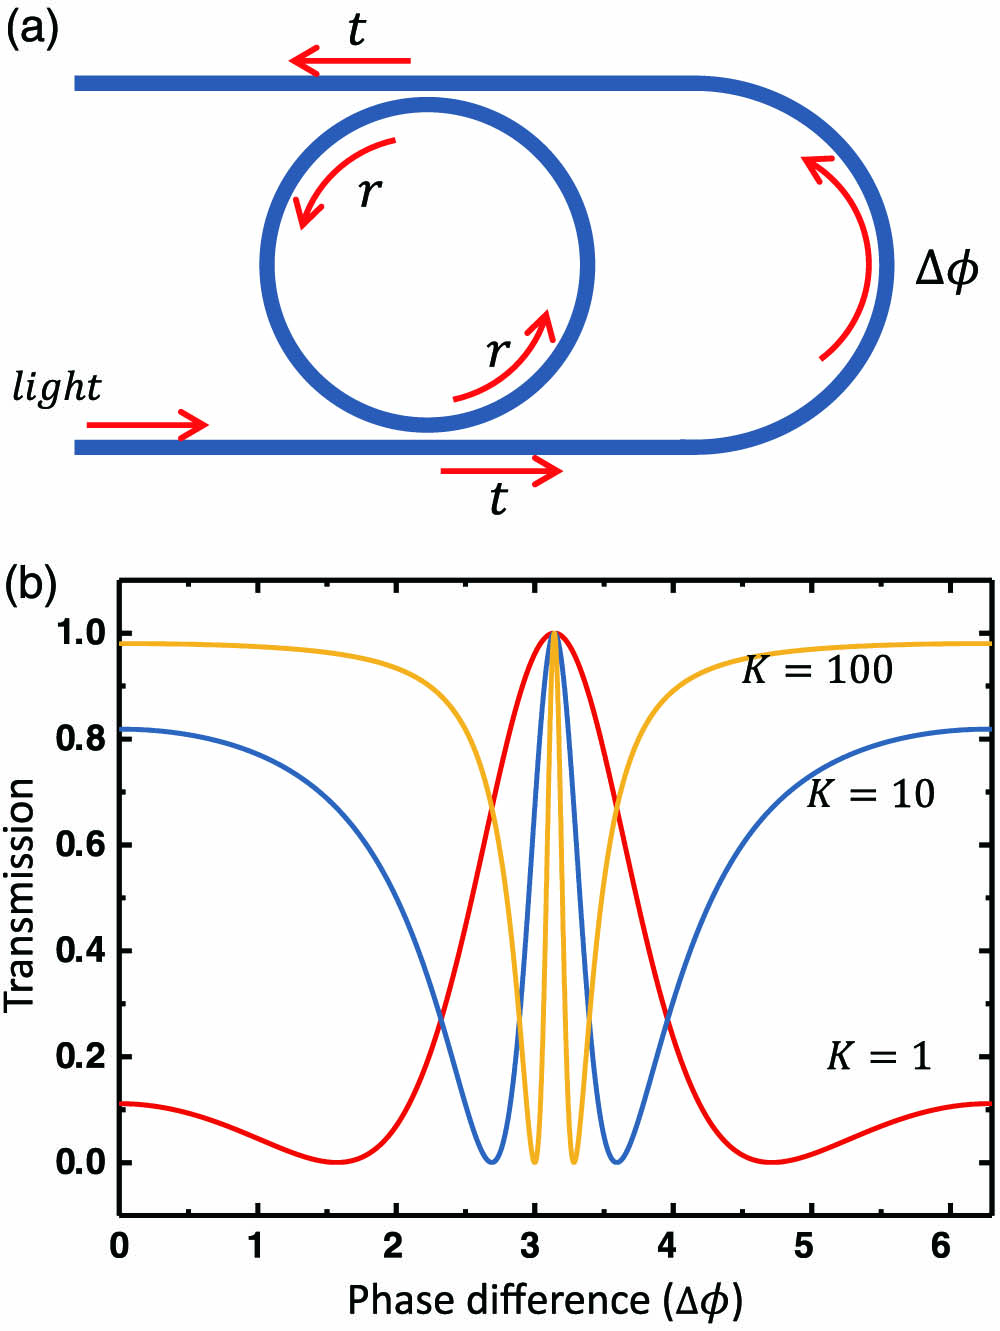 (a) Schematic of the self-interference microring resonator. (b) Simulated transmission at resonance frequency with different ratios K=κex/κin varying with the phase difference, which is induced by the feedback waveguide.